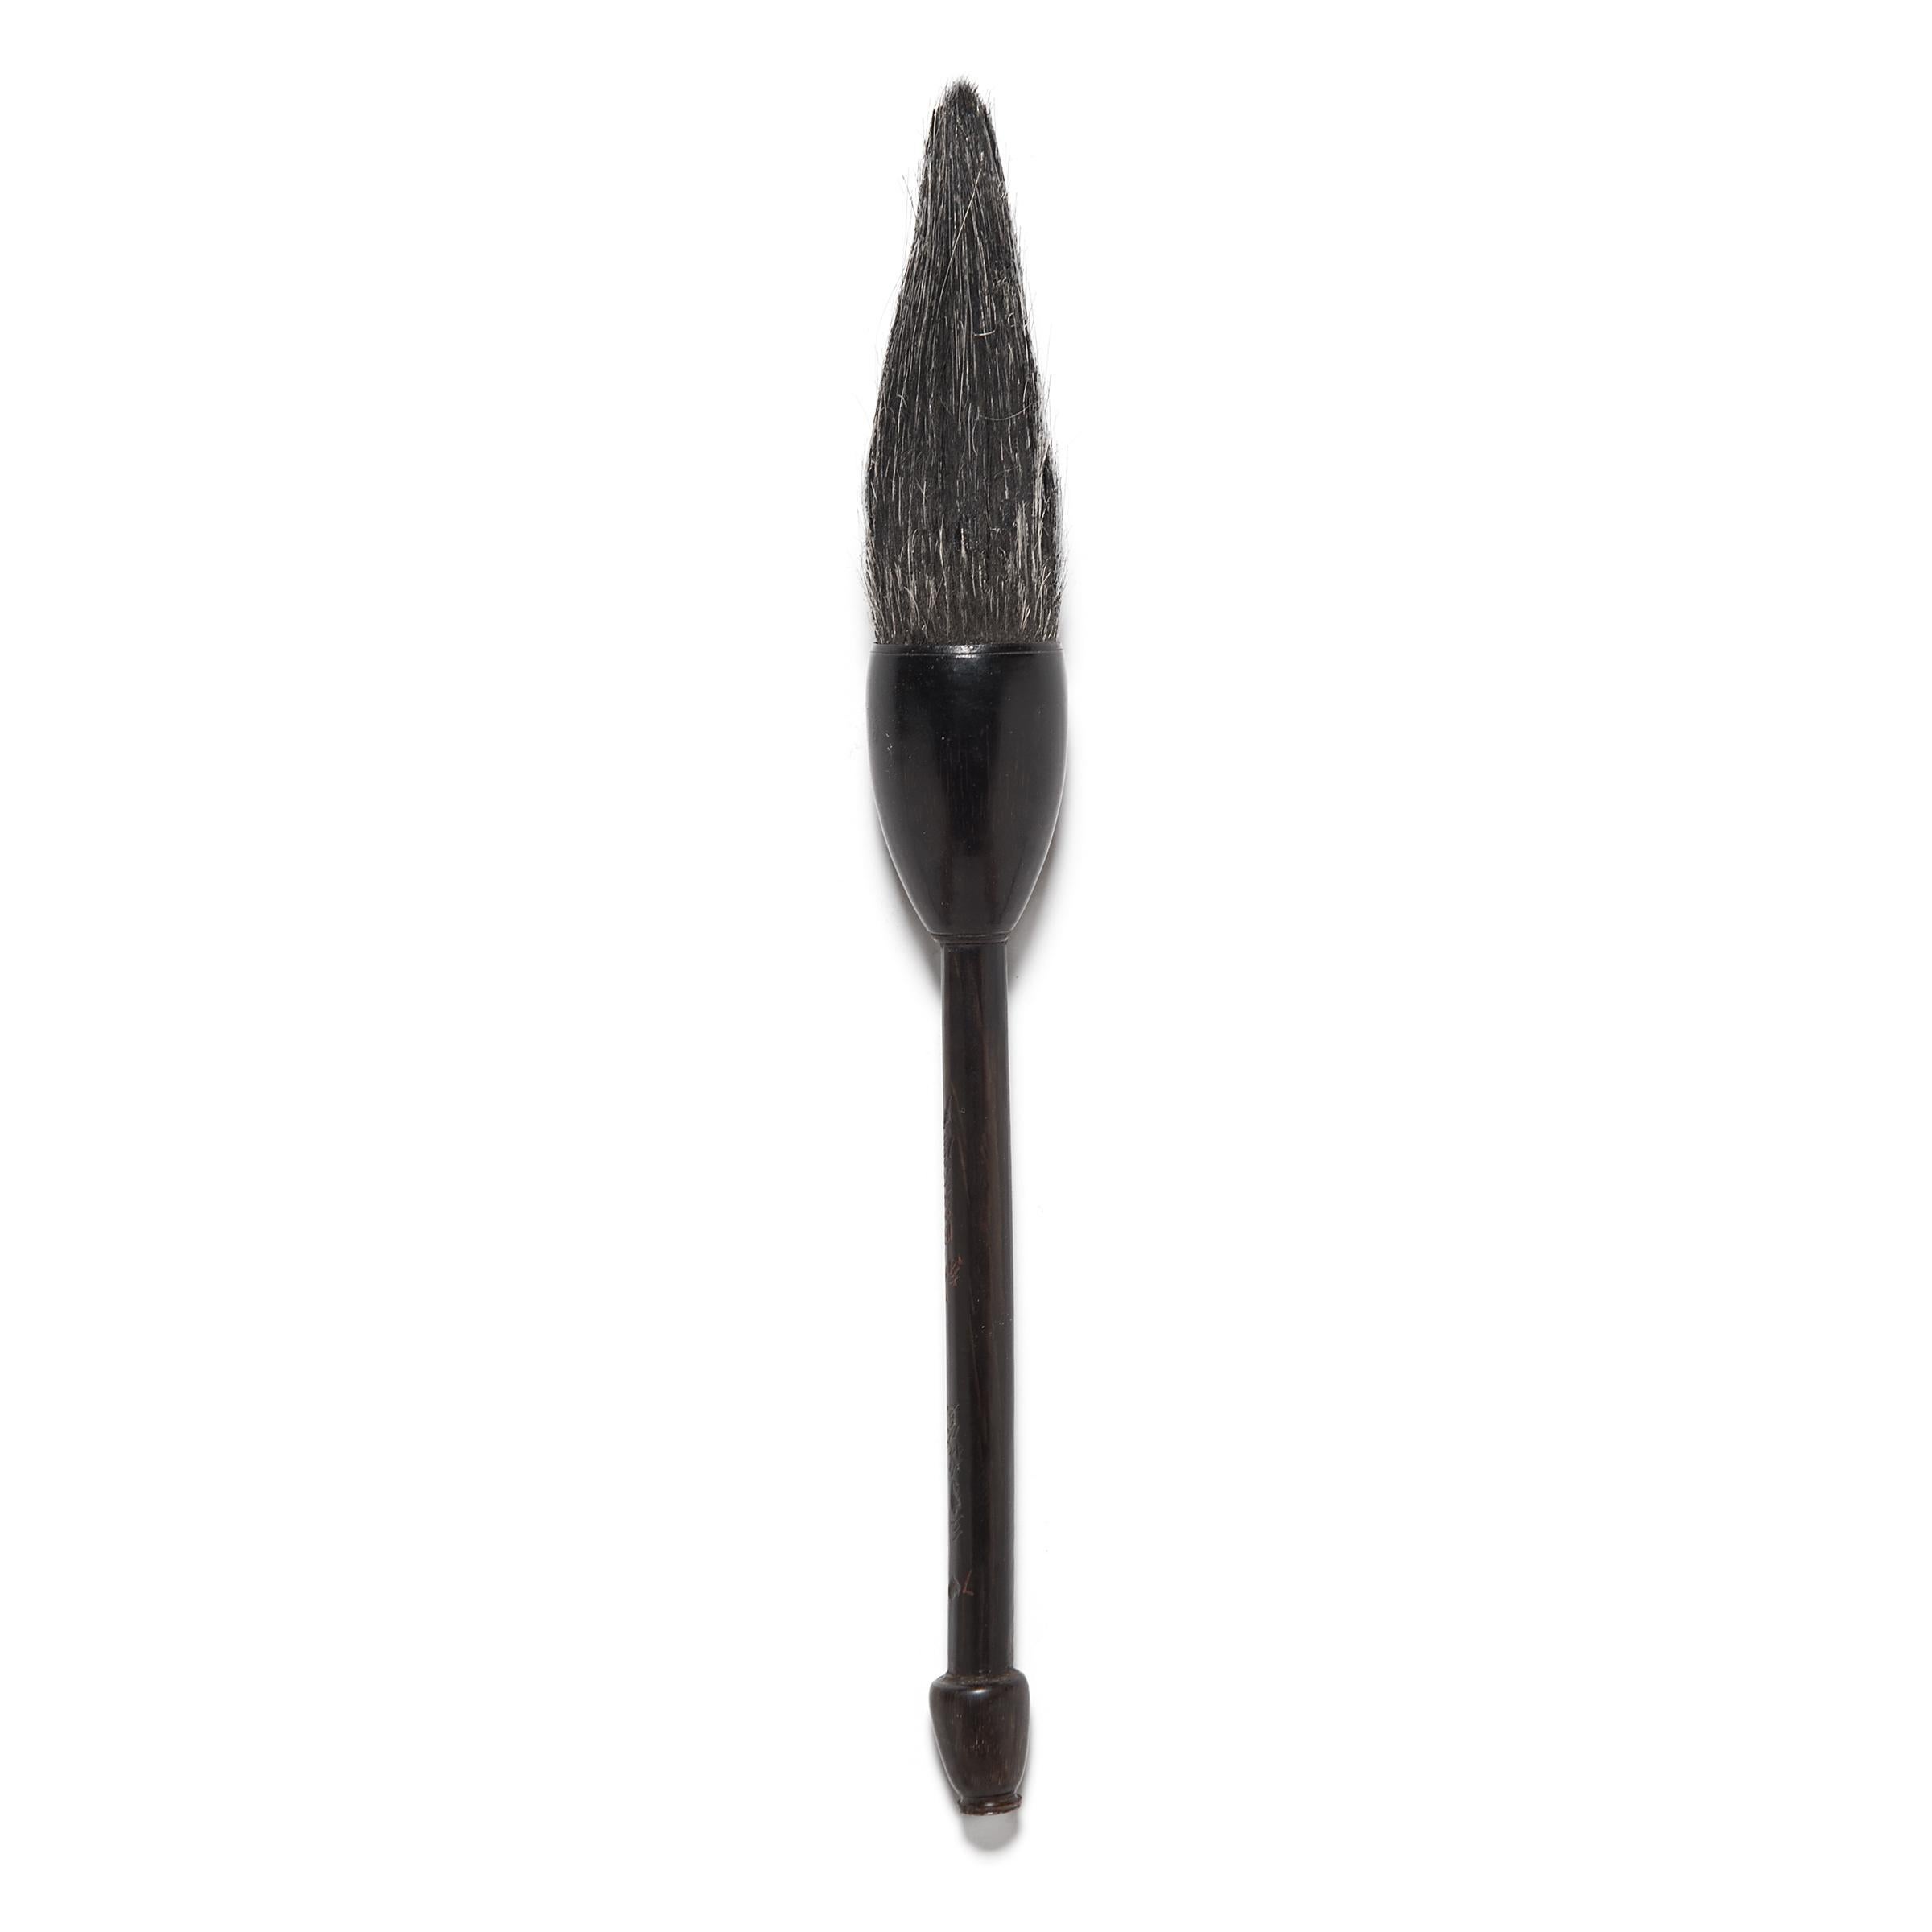 Along with paper, ink, and inkstone, the brush was part of the four treasures found in a scholar’s studio. Arguably the most important tool, the brush served as a direct link to the artist’s creative spirit. This early 20th century calligraphy brush